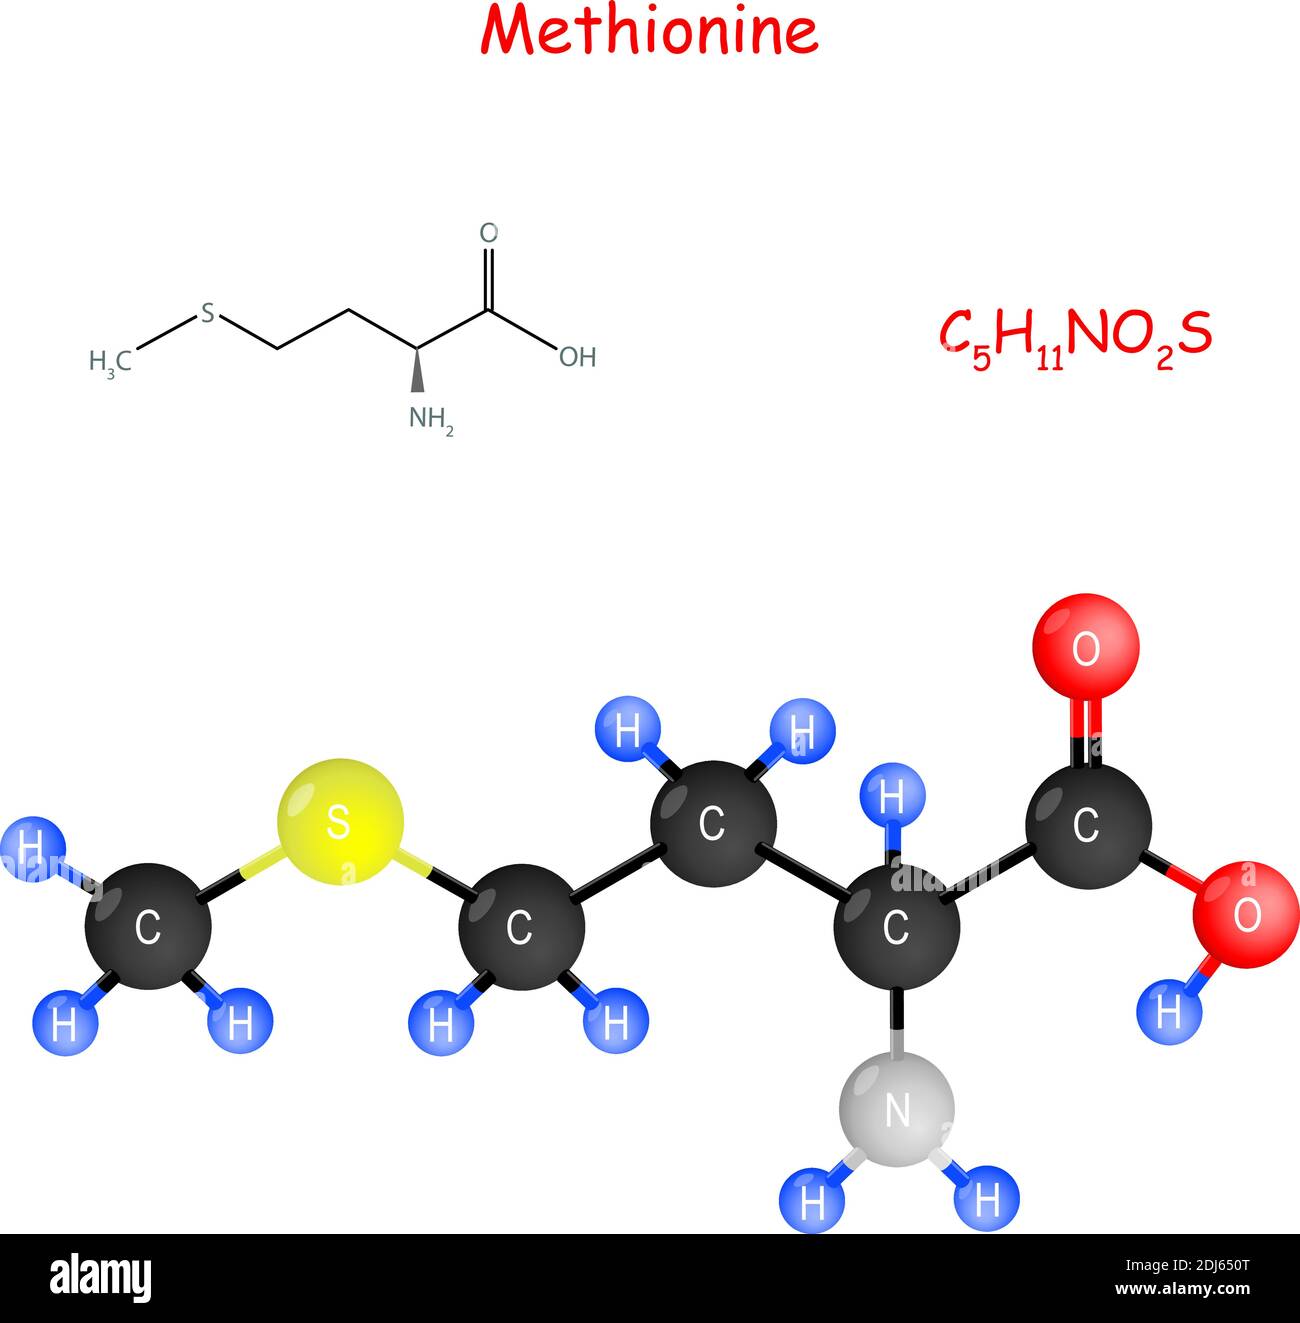 Methionine is an essential amino acid for biosynthesis of proteins. Chemical structural formula and model of molecule. Stock Vector